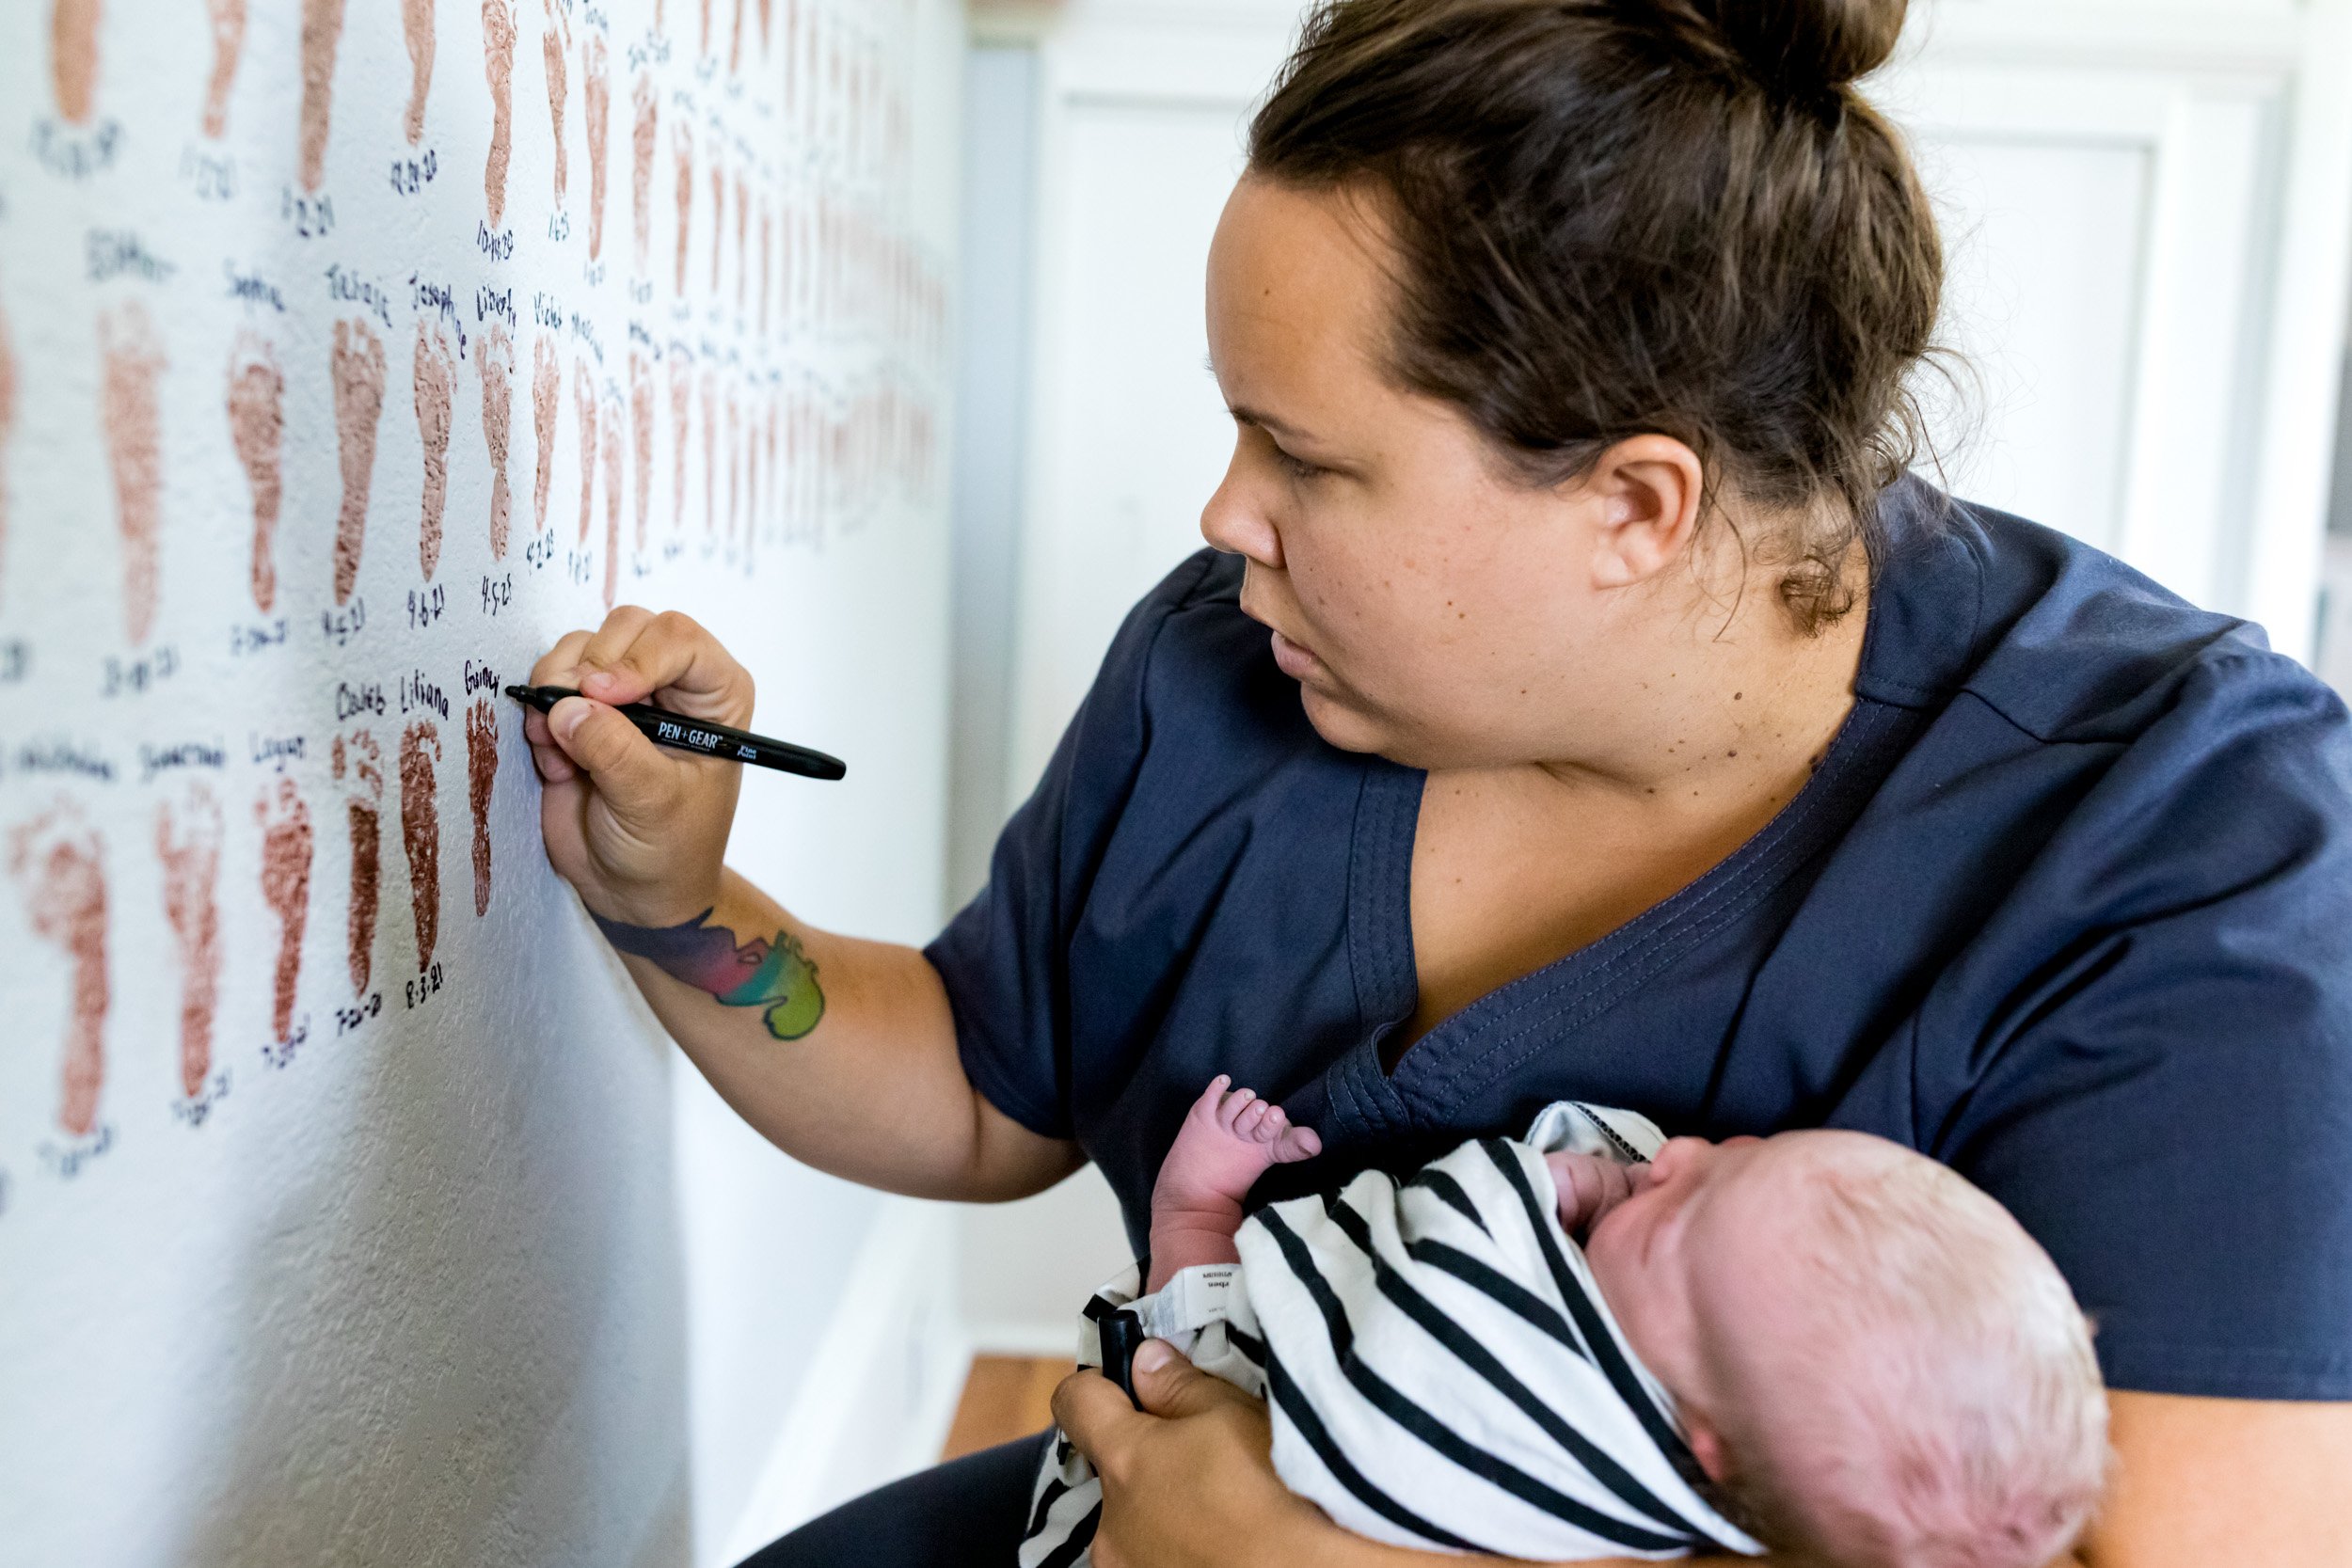 midwife writing the name of the baby on the wall